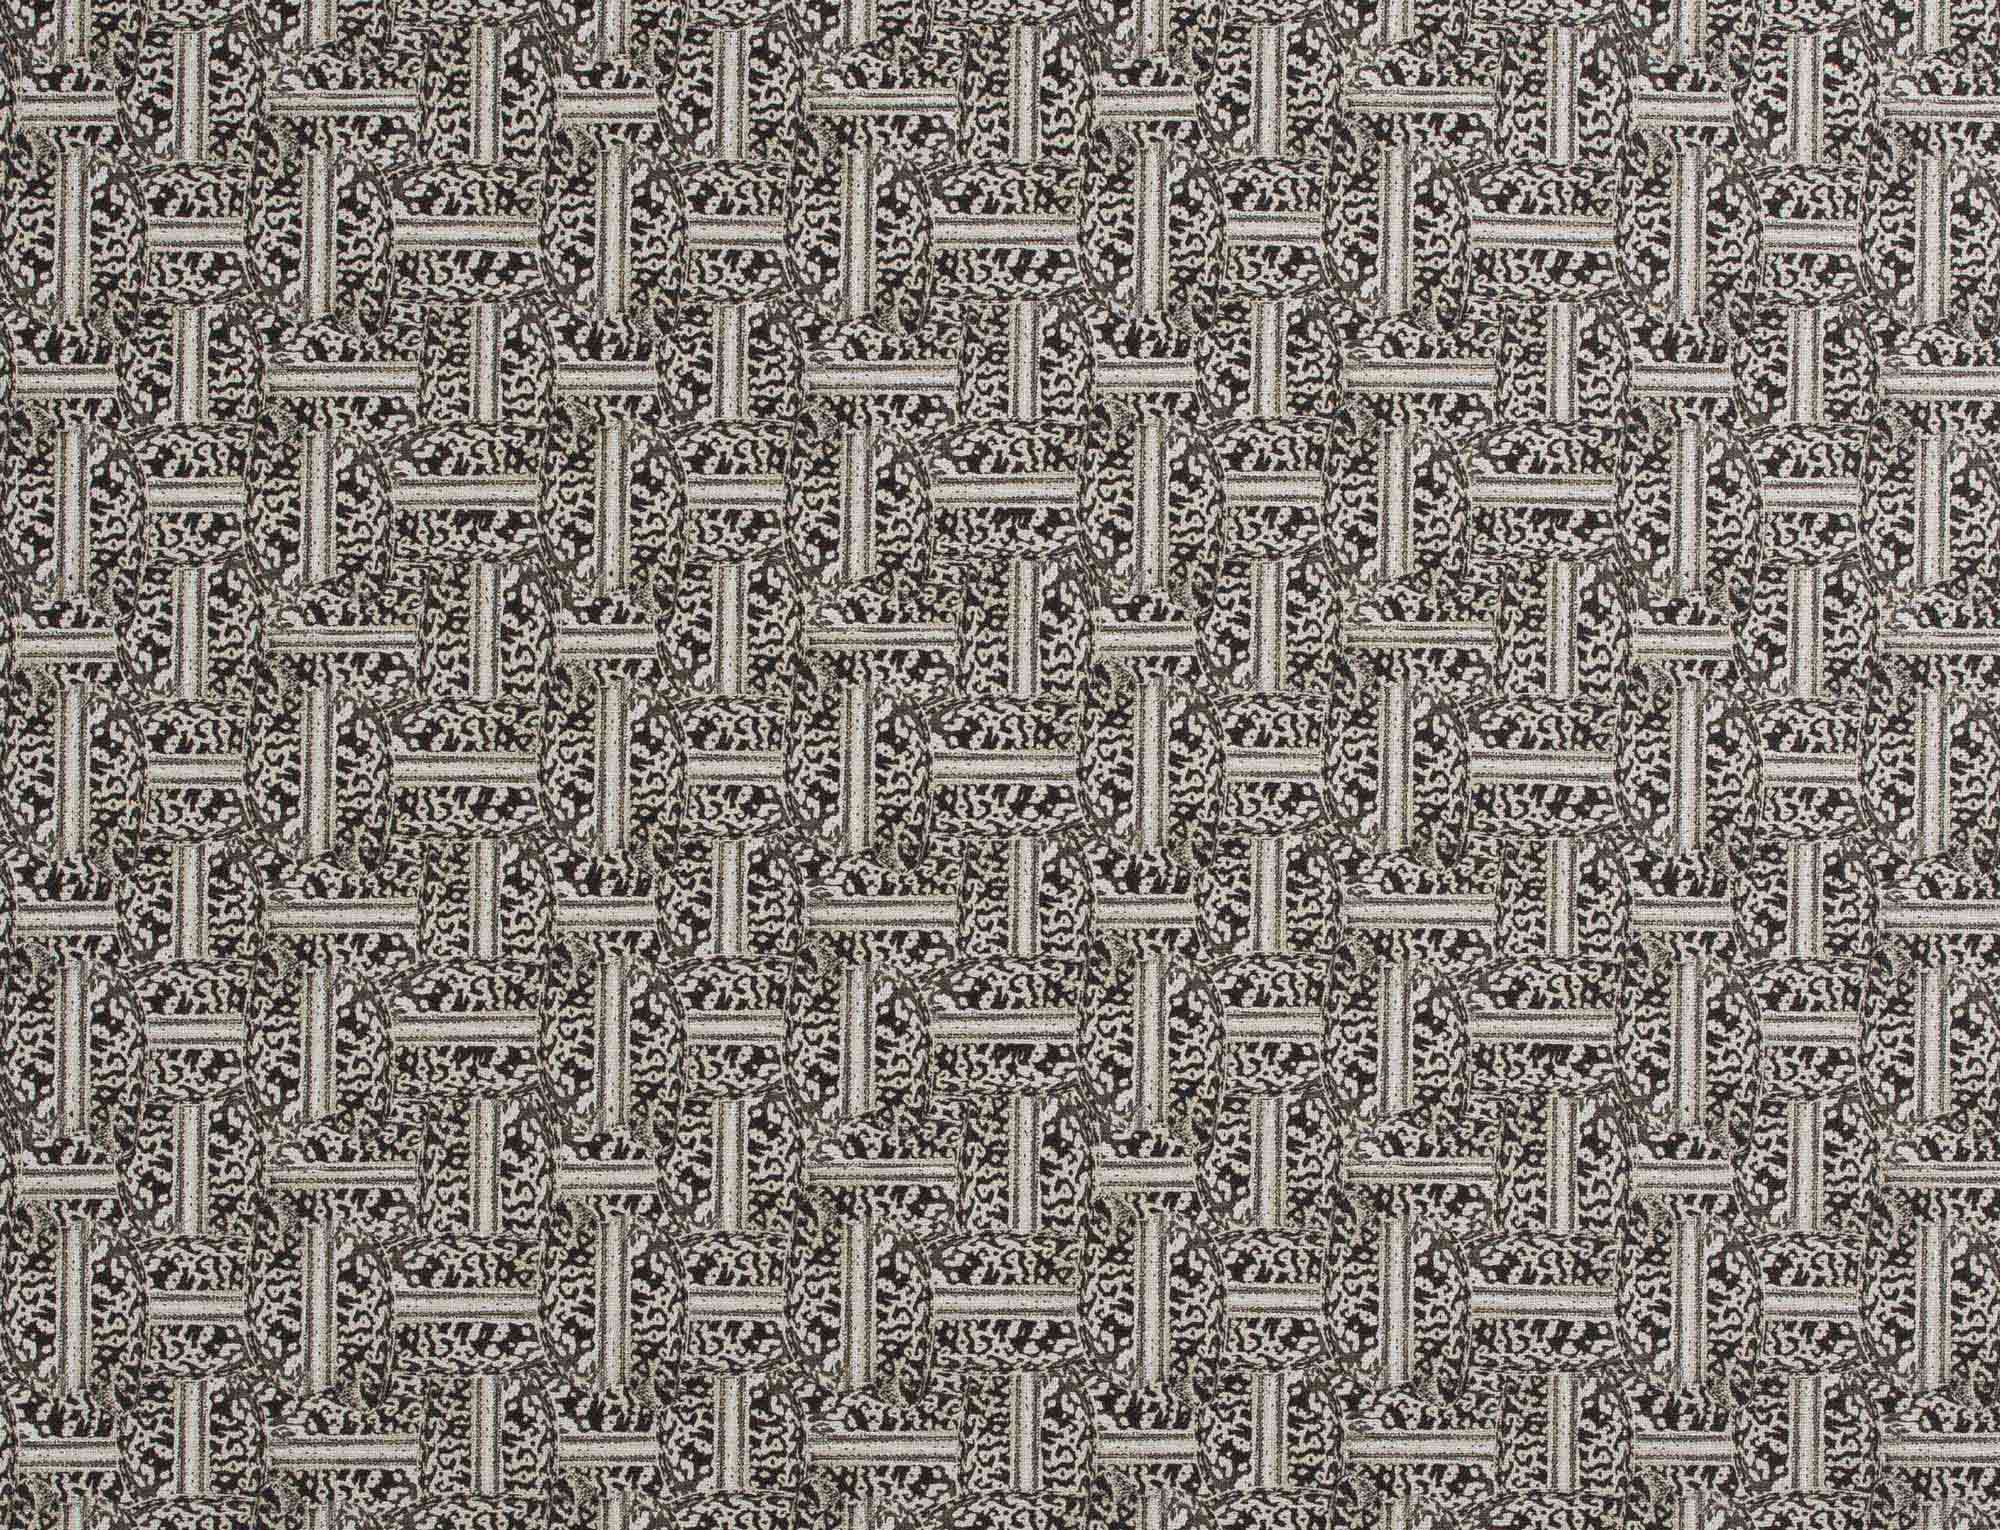 Detail of fabric in a geometric grid pattern in black on a cream field.